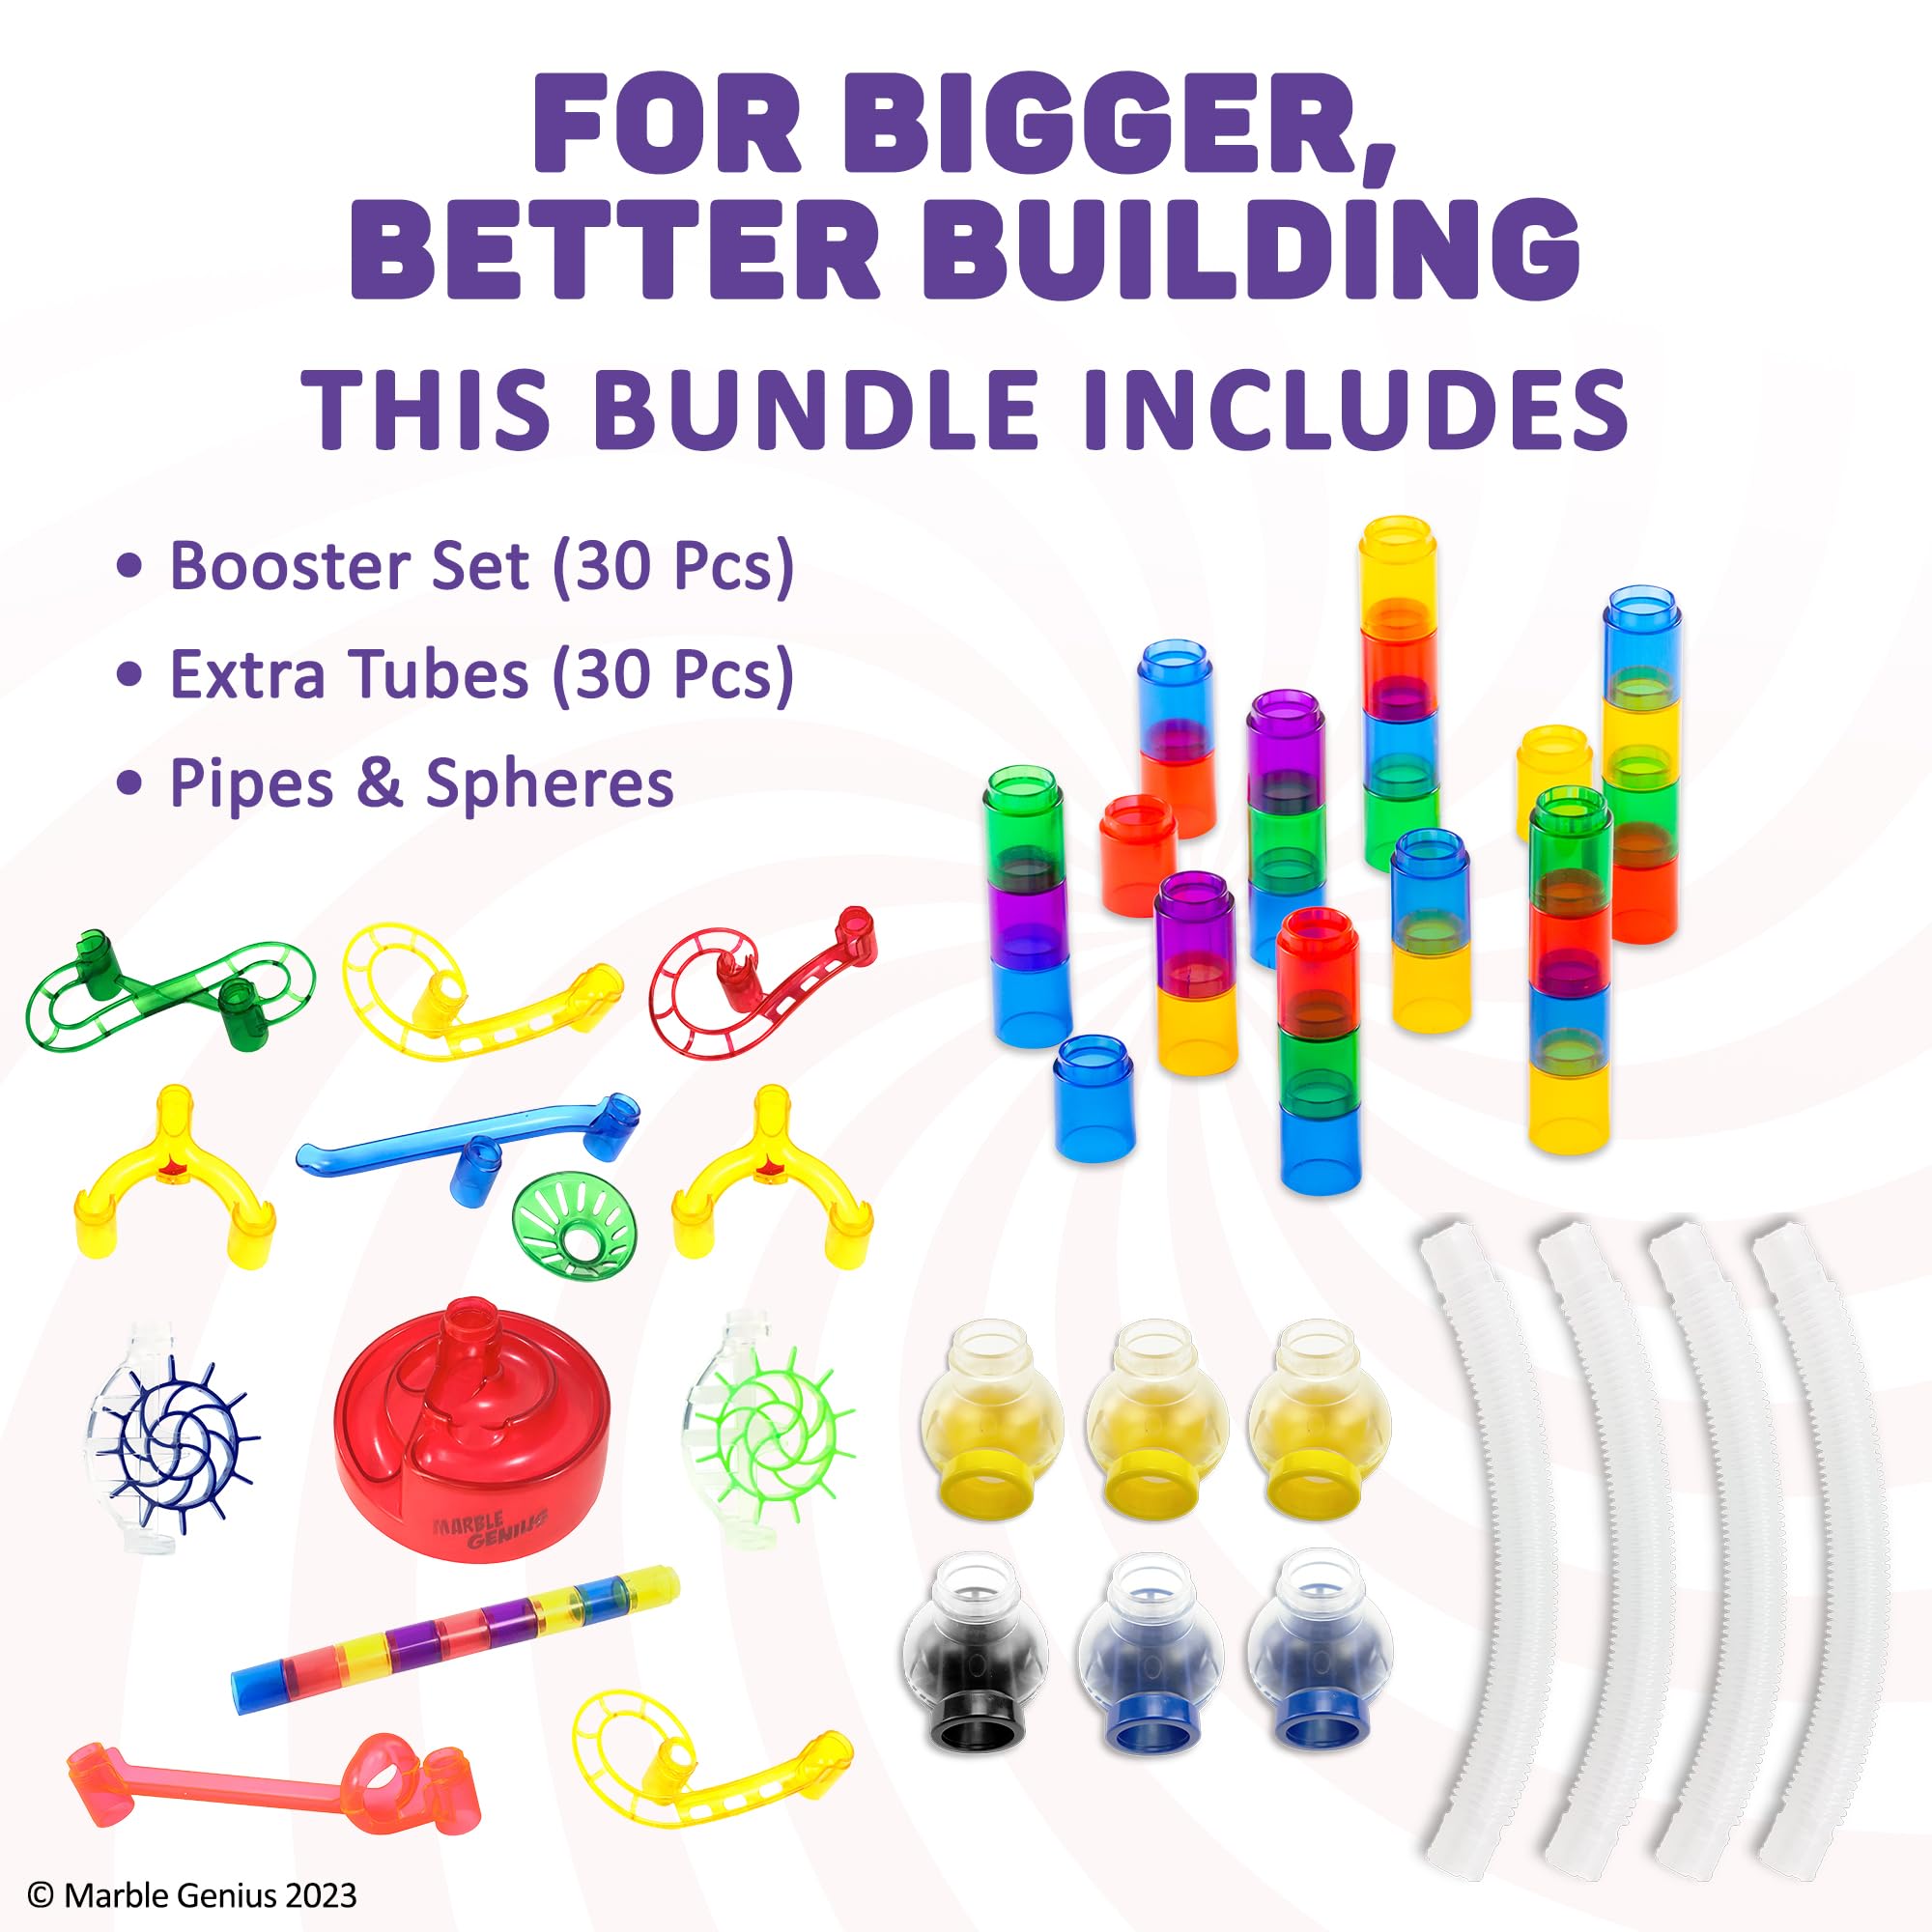 Marble Genius Bundle: Marble Run Booster Set (30 Pieces), Tubes Accessory (30 Pieces), Pipes & Spheres Accessory (10 Pieces), STEM Building & Learning Educational Construction